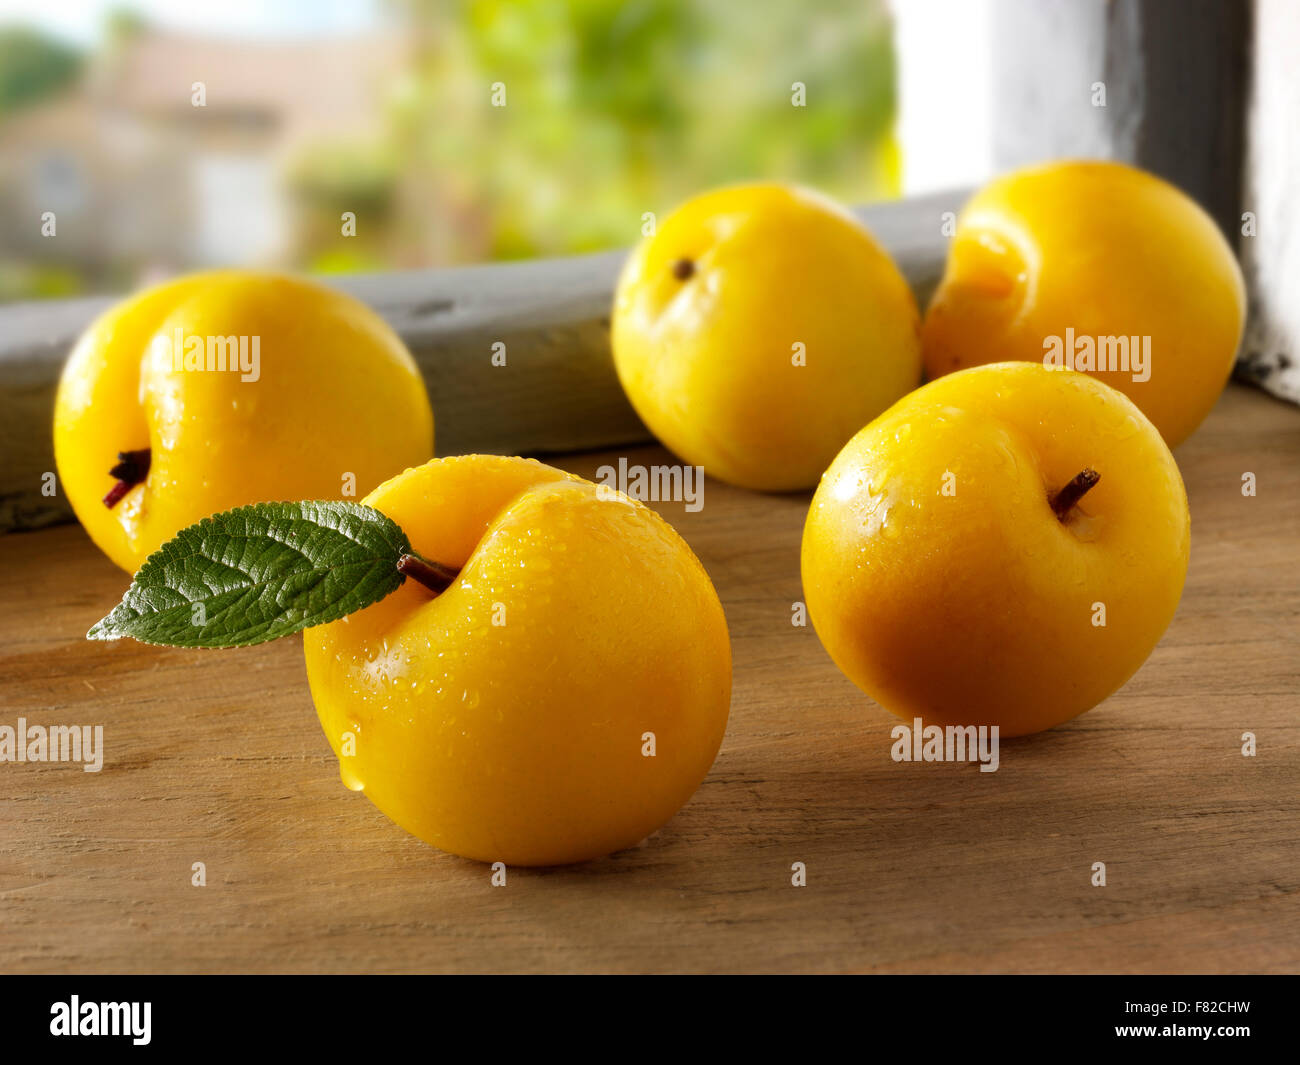 Close up of fresh whole uncooked yellow Golden plums (Prunus domestica ) Stock Photo